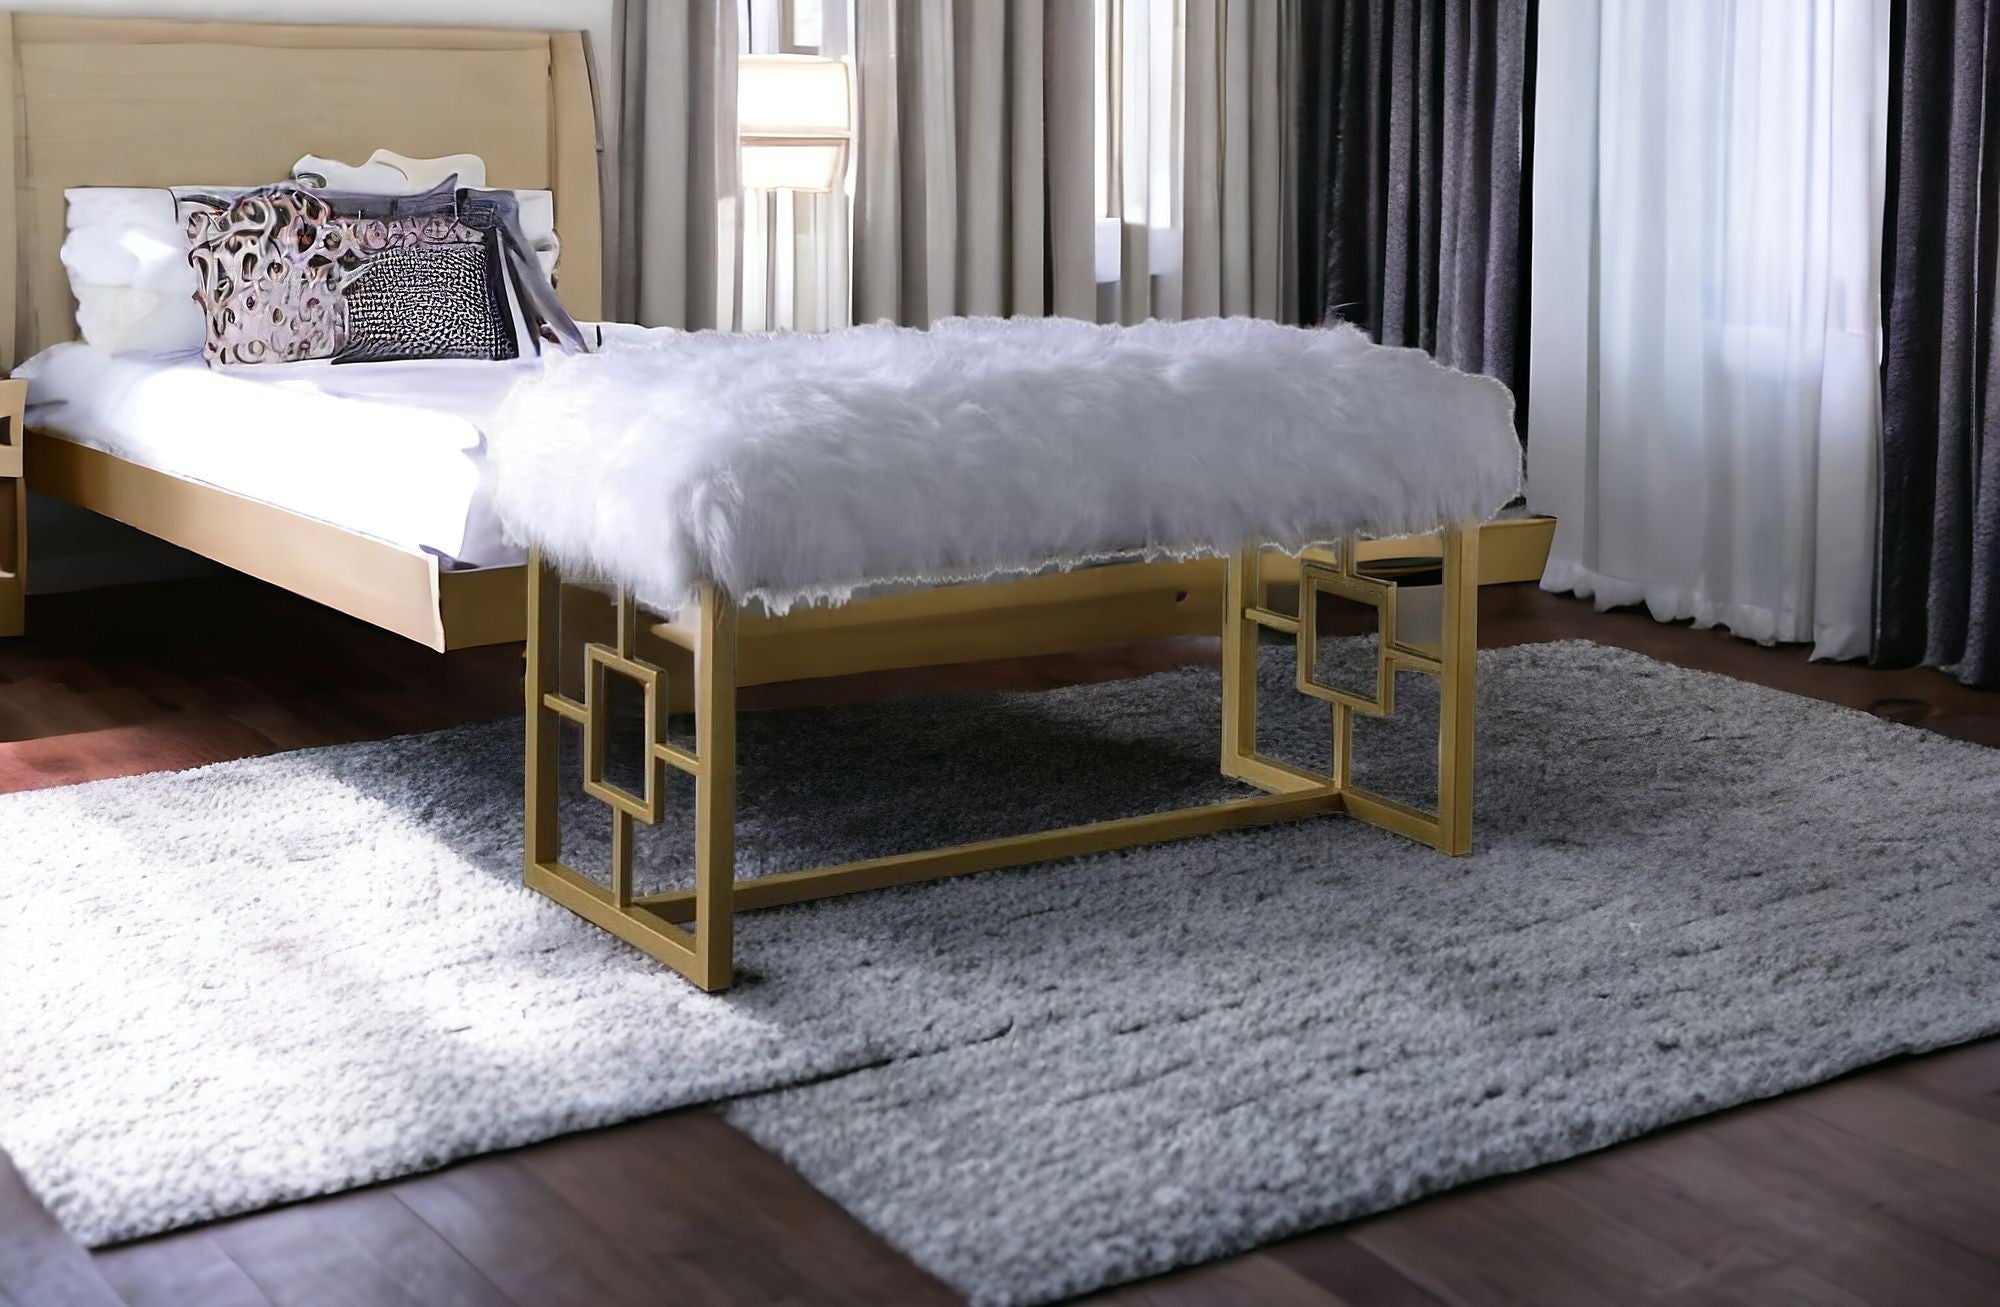 18" White and Gold Upholstered Faux Fur Bench